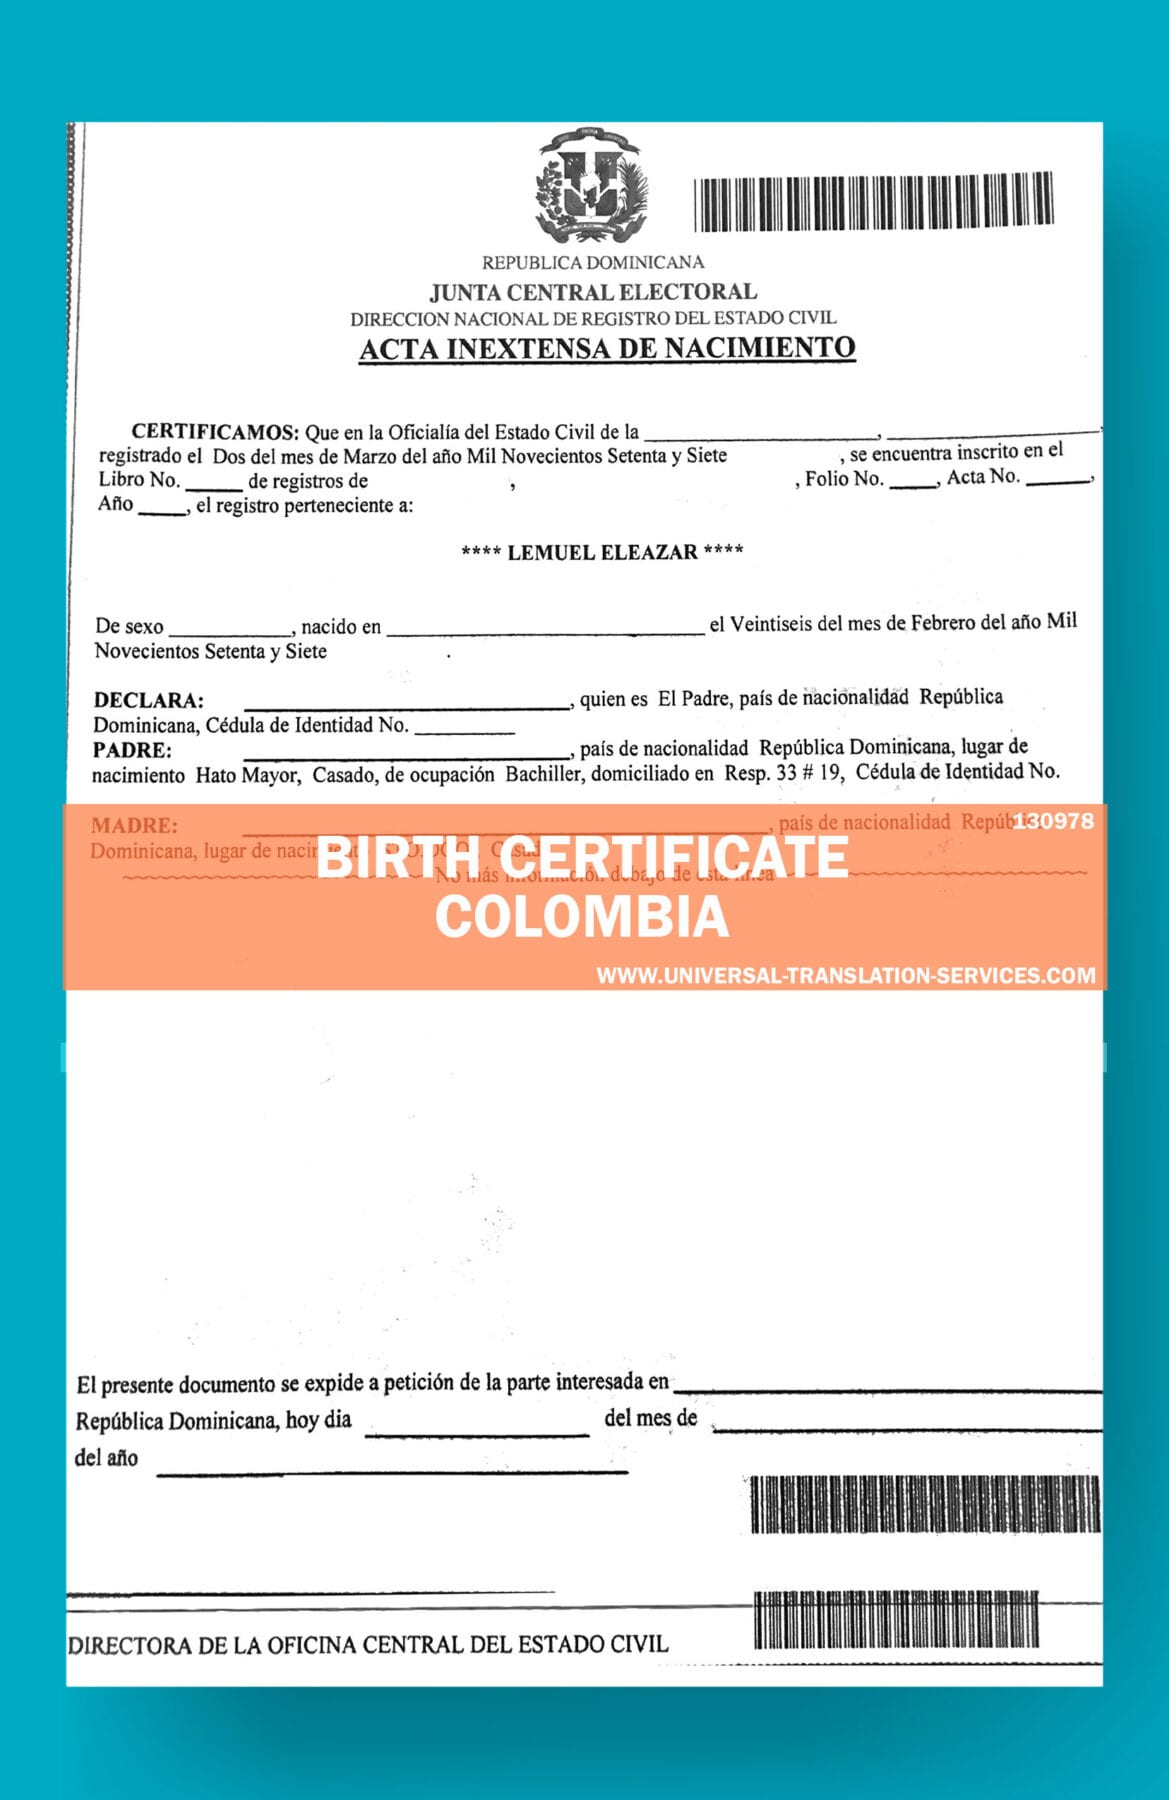 Birth Certificate Translation for Columbia (official ATA member)